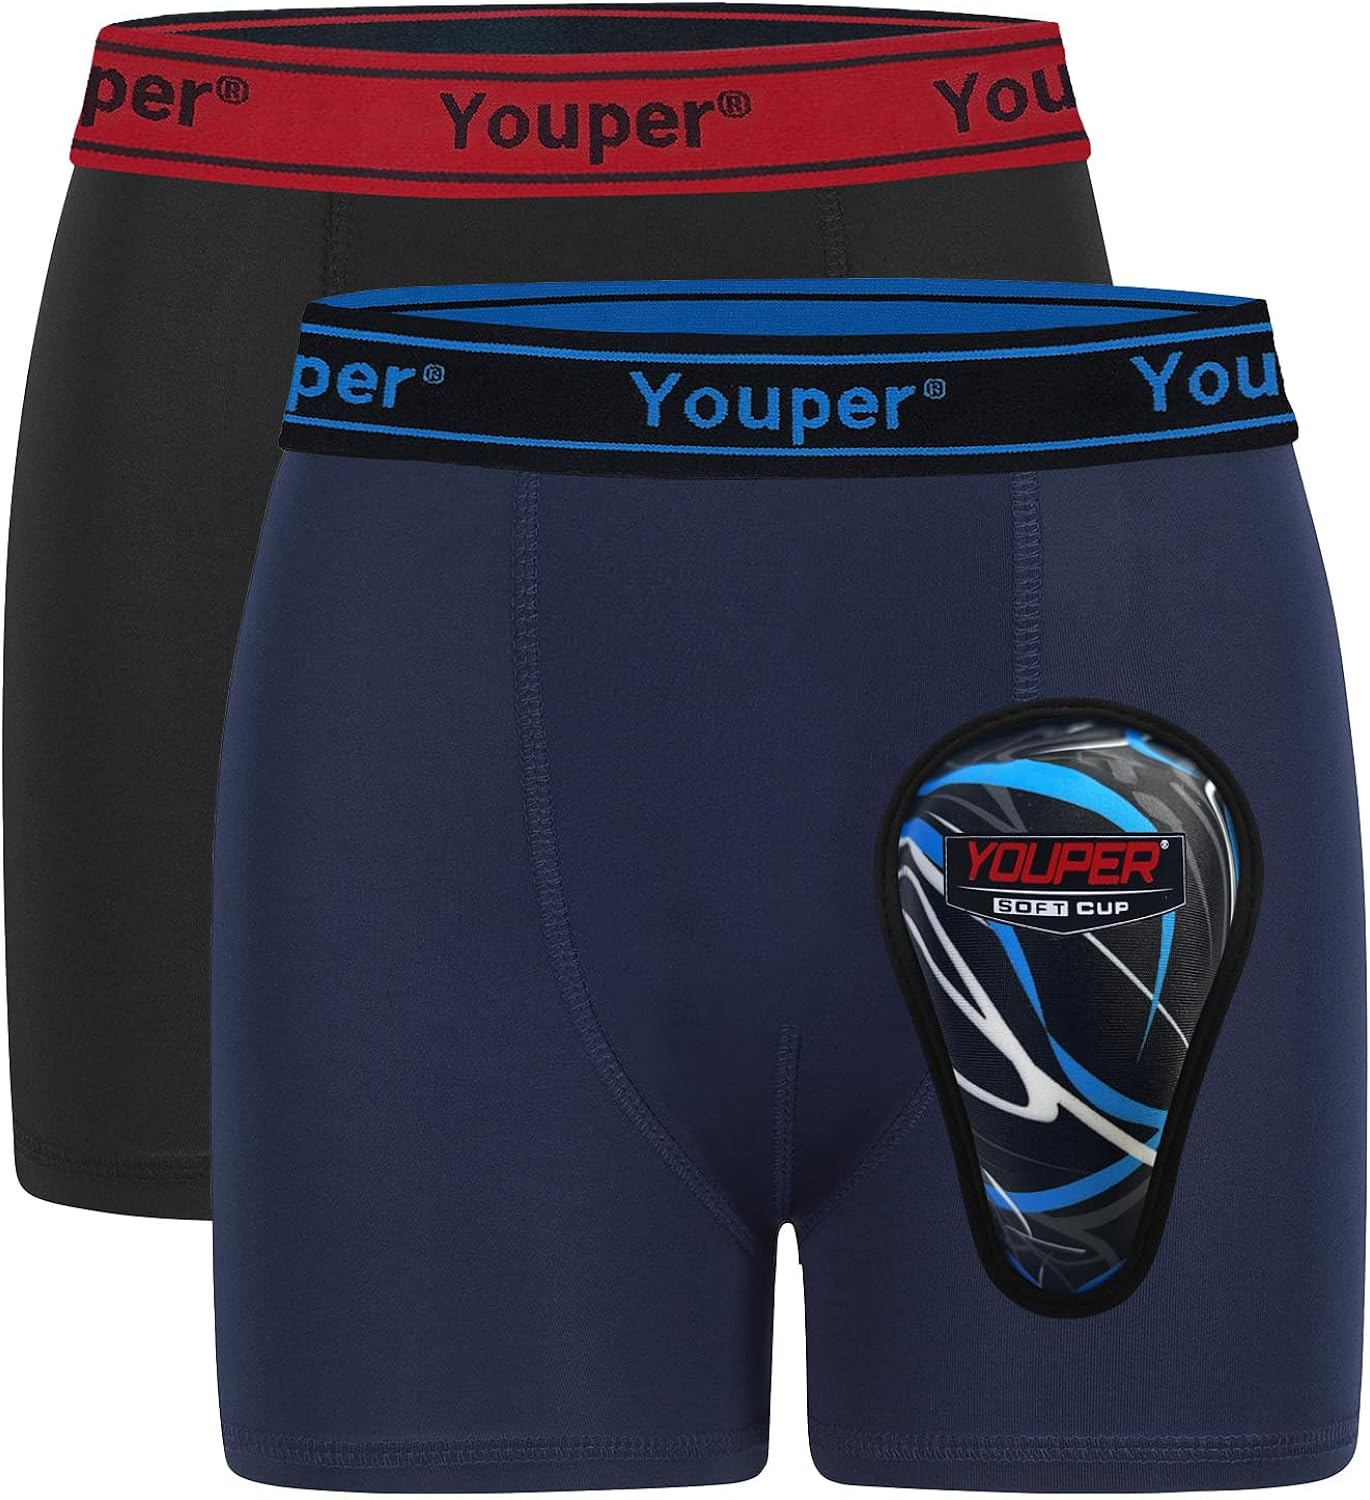 Youper Athletic Cup and Underwear Boys Kid Youth Size Medium